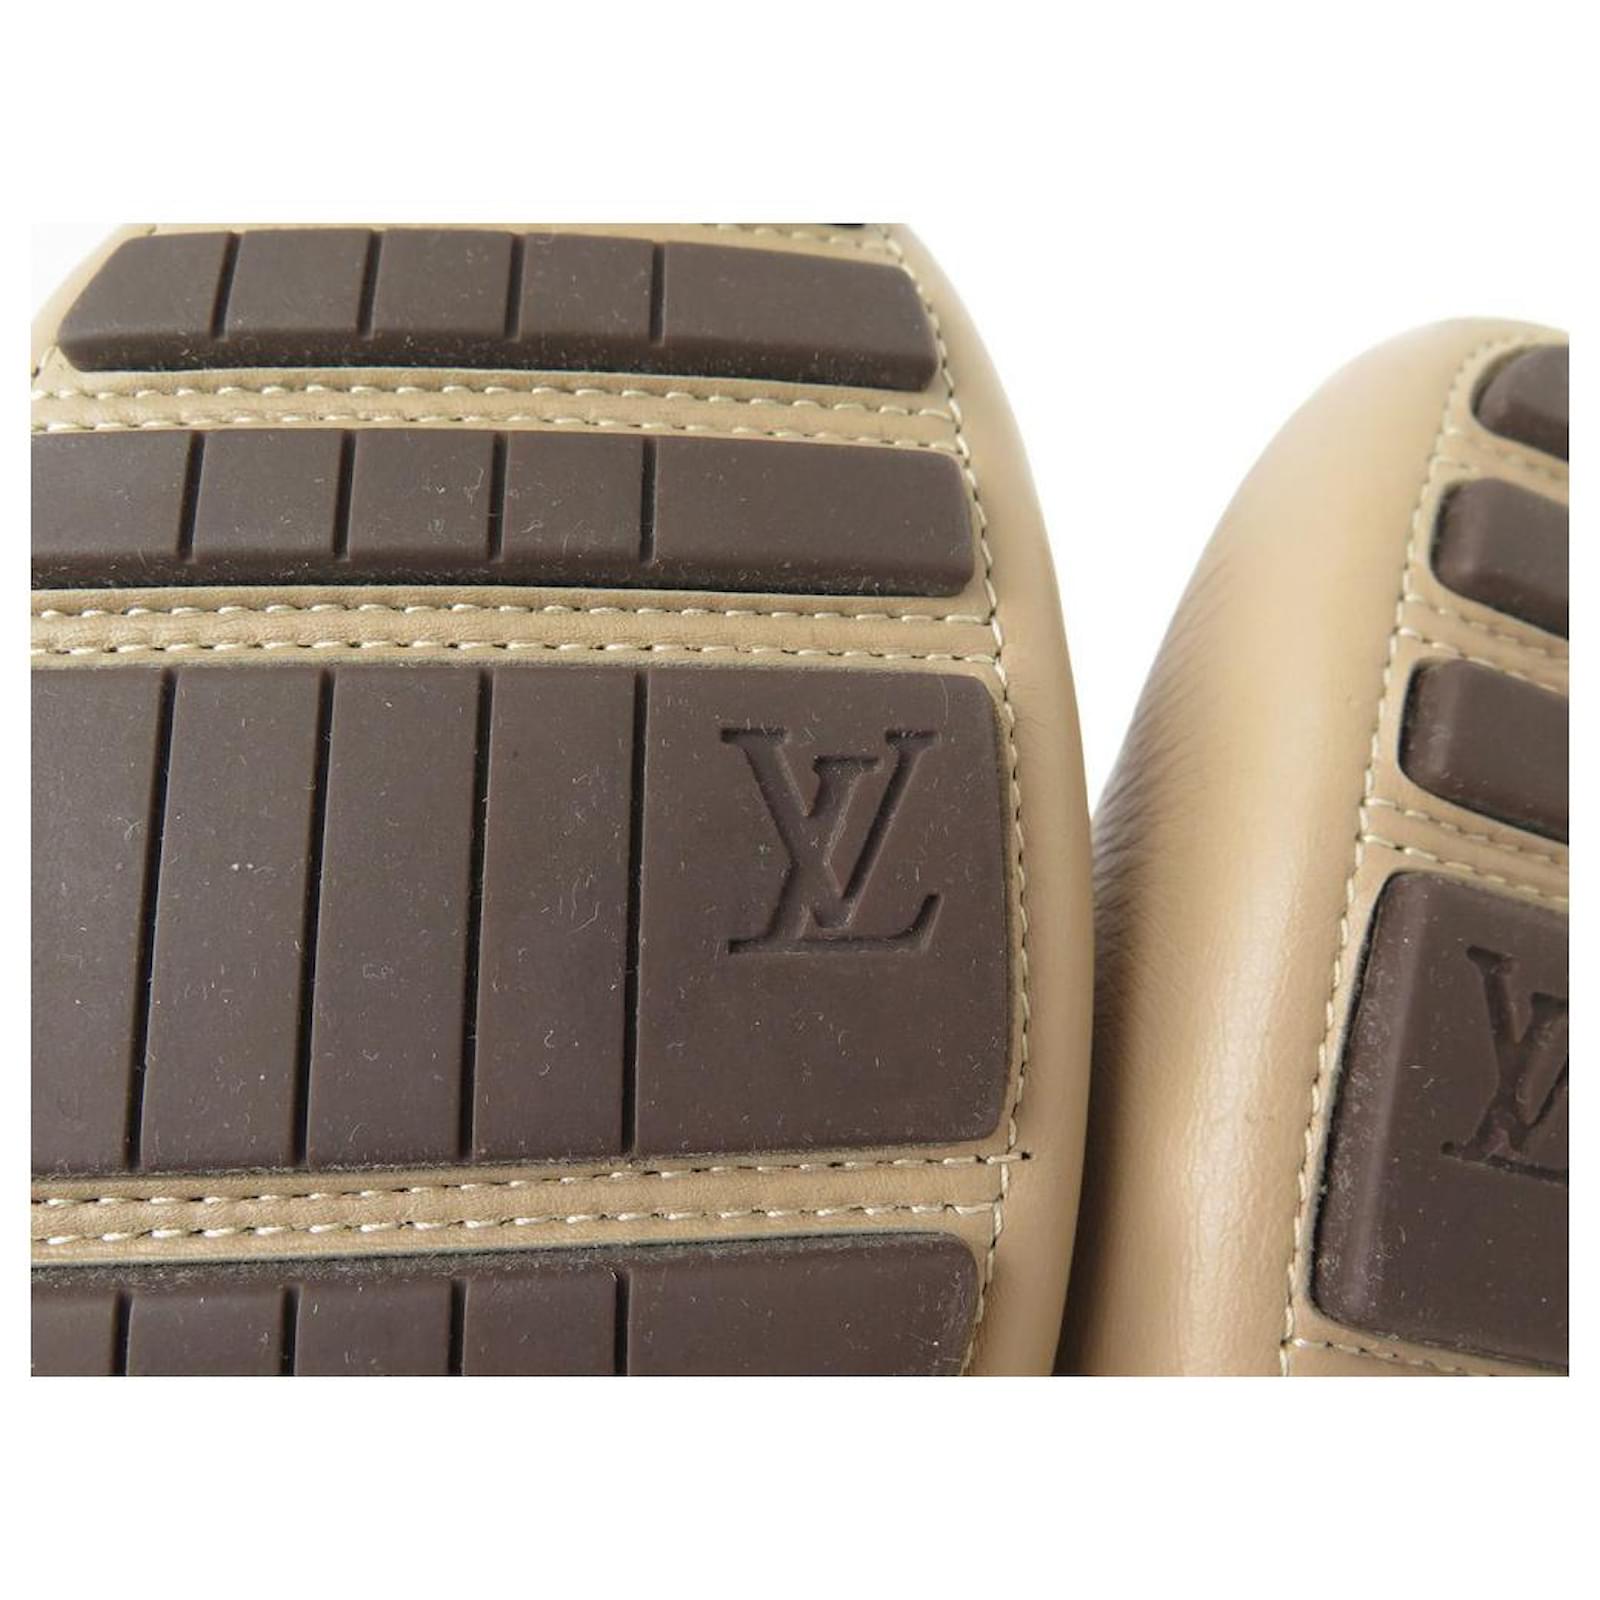 NEW LOUIS VUITTON SHOES LOMBOK MOCCASIN 8.5 42.5 BEIGE LEATHER BOX